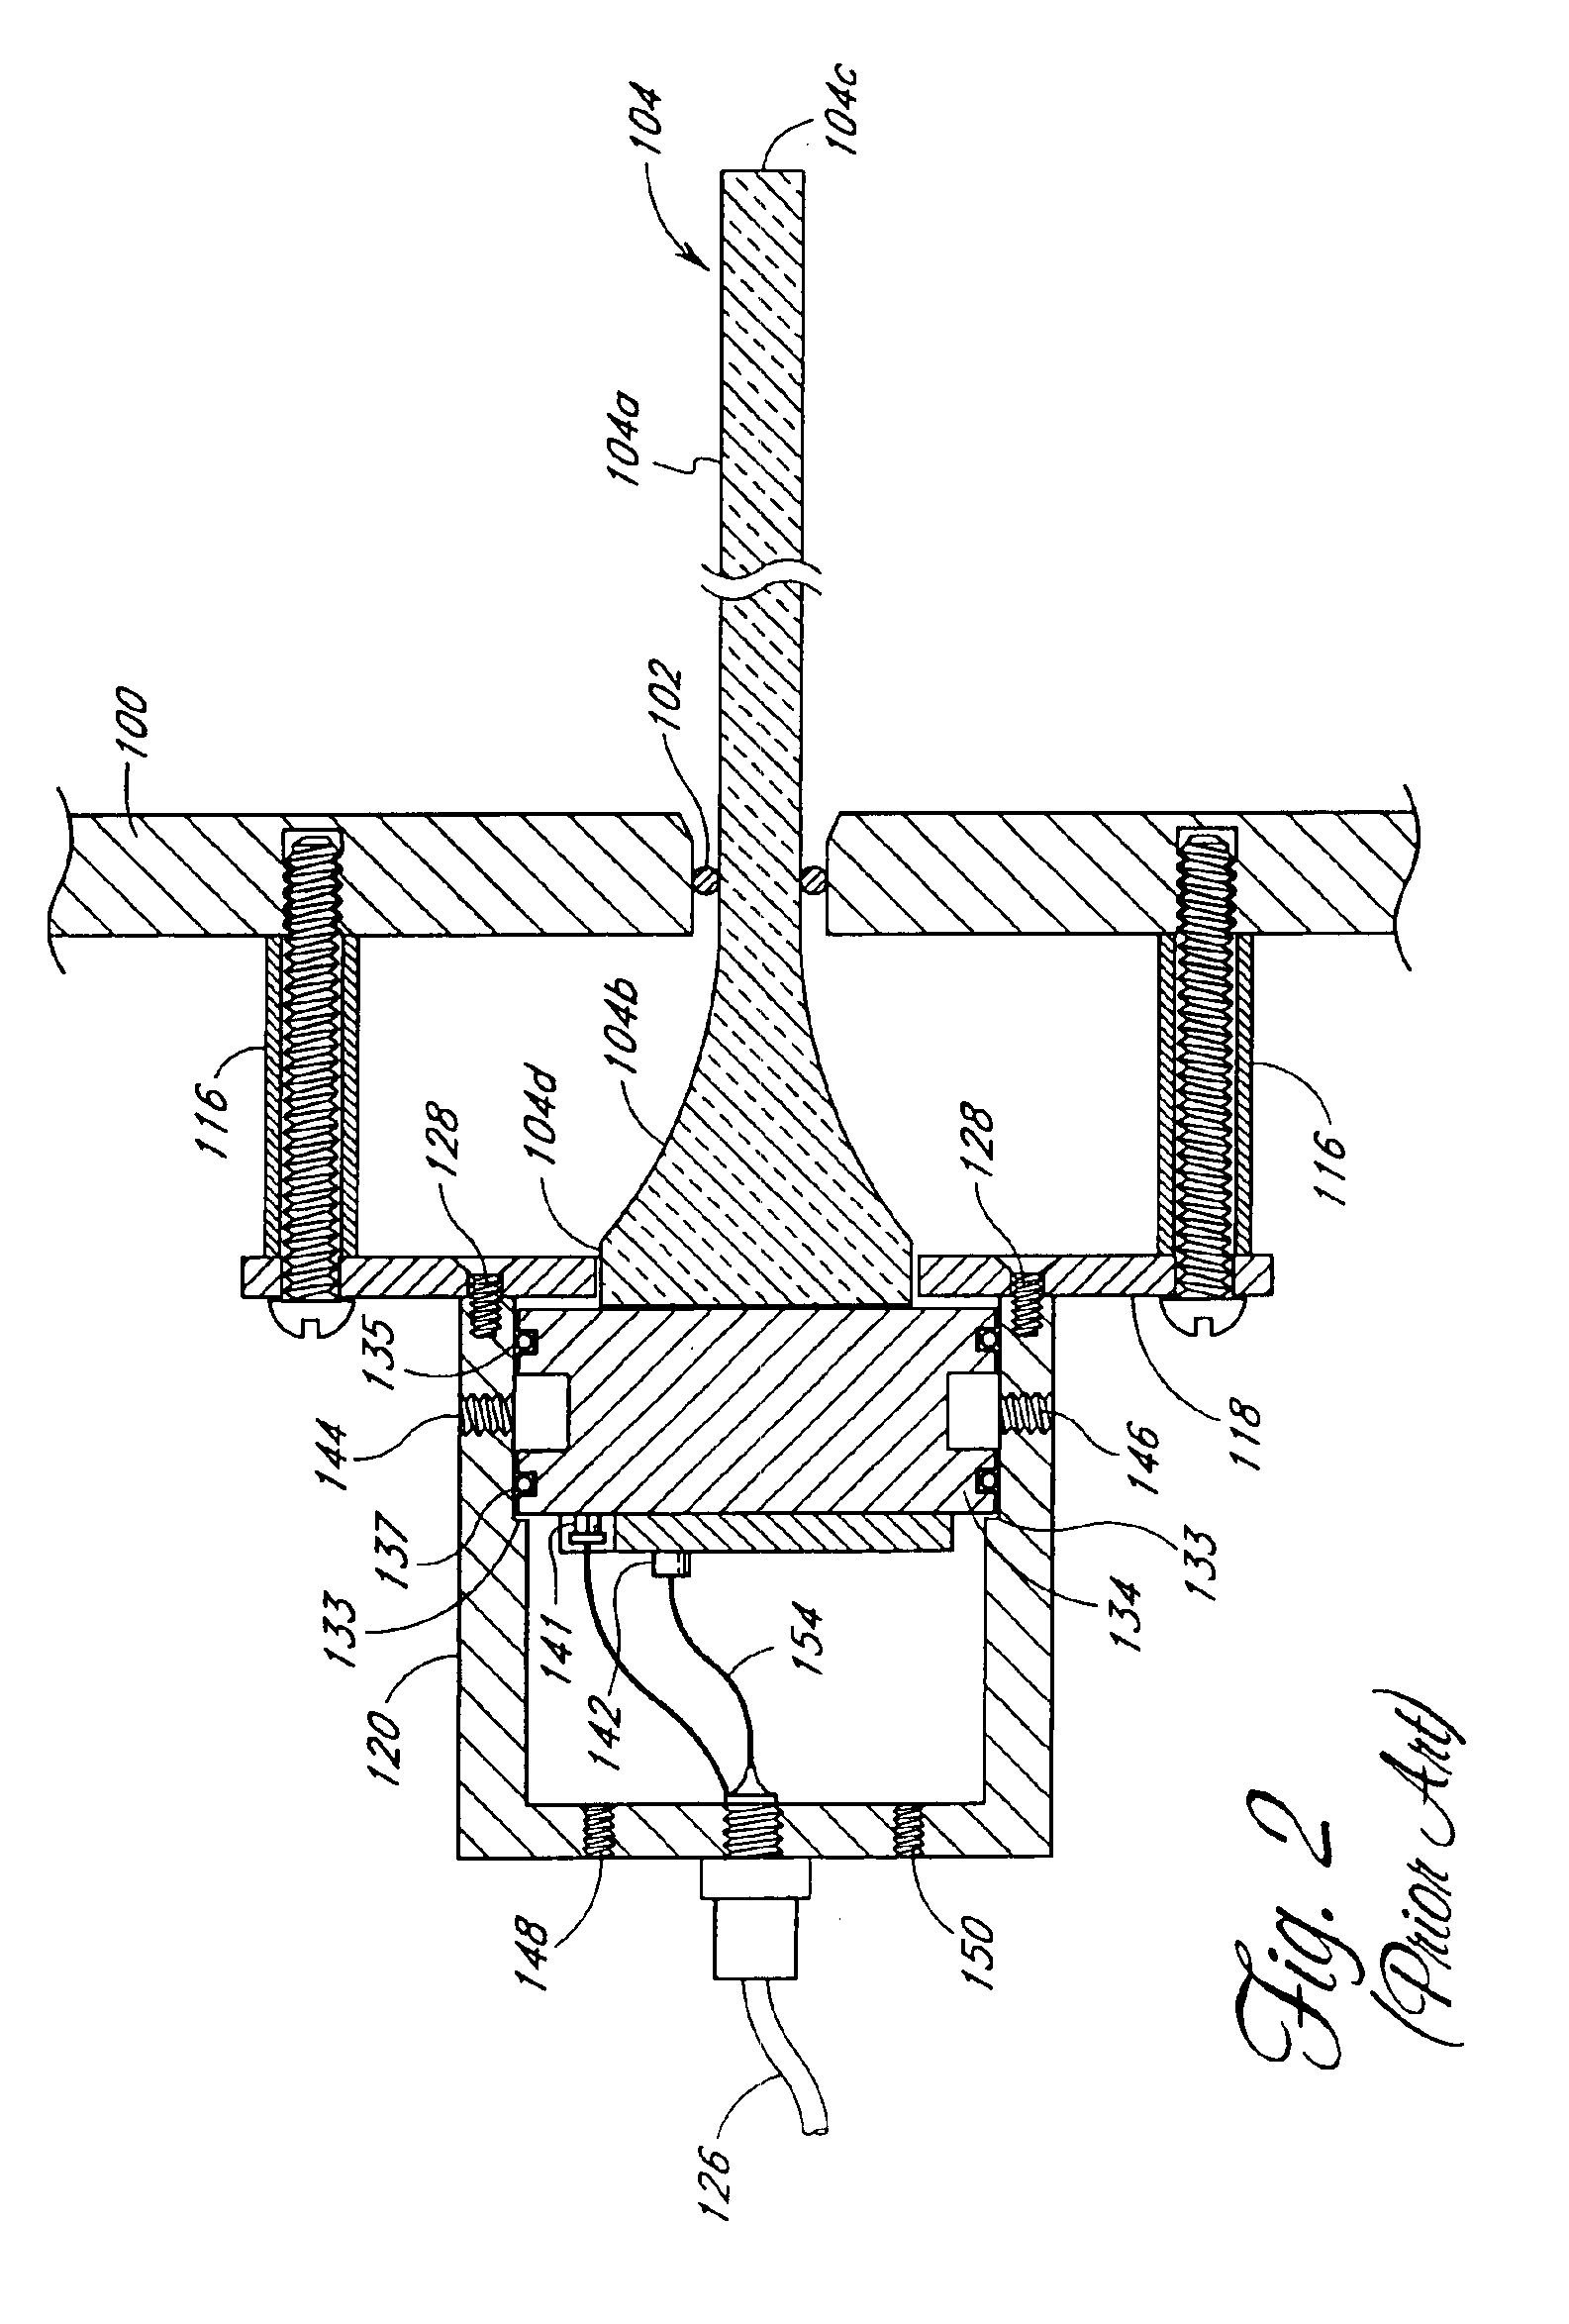 Apparatus and methods for reducing damage to substrates during megasonic cleaning processes